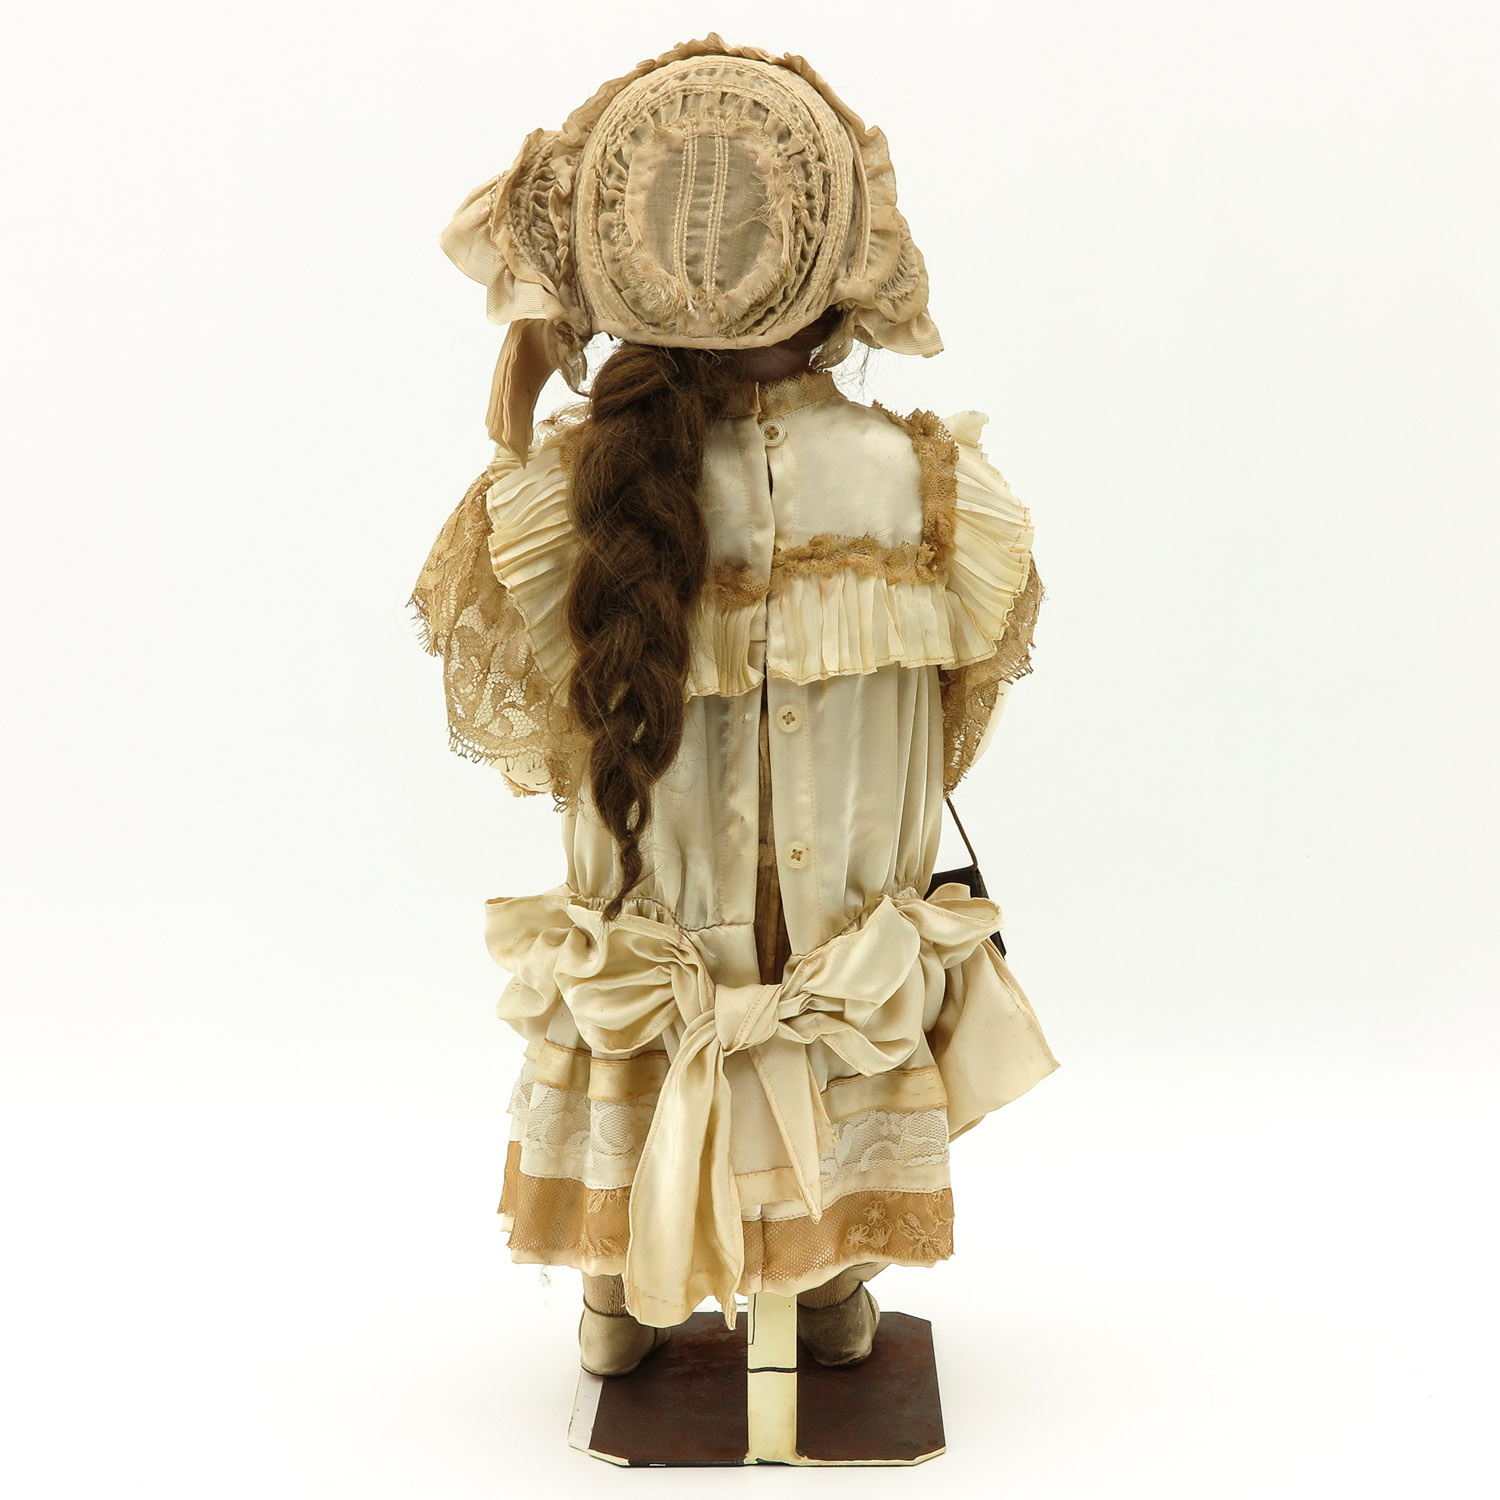 An Antique Halbig Doll - Image 3 of 5